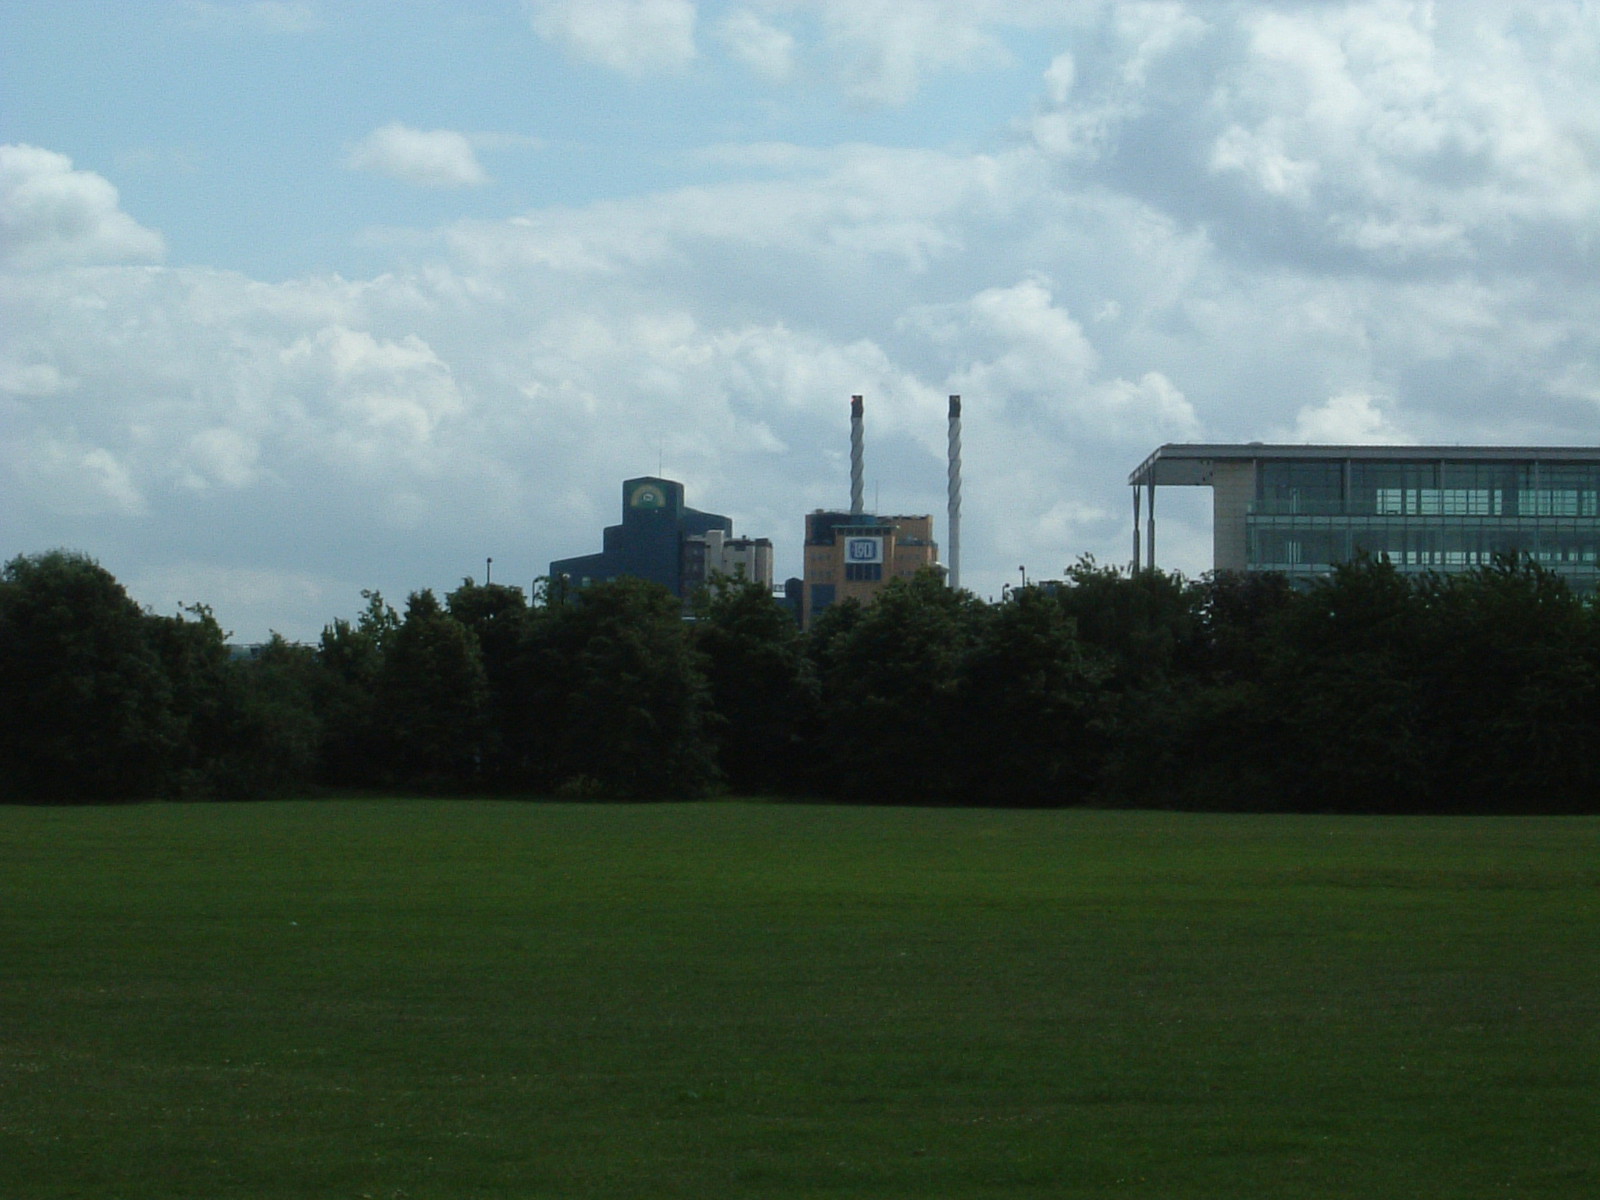 City Airport and the Tate and Lyle factory